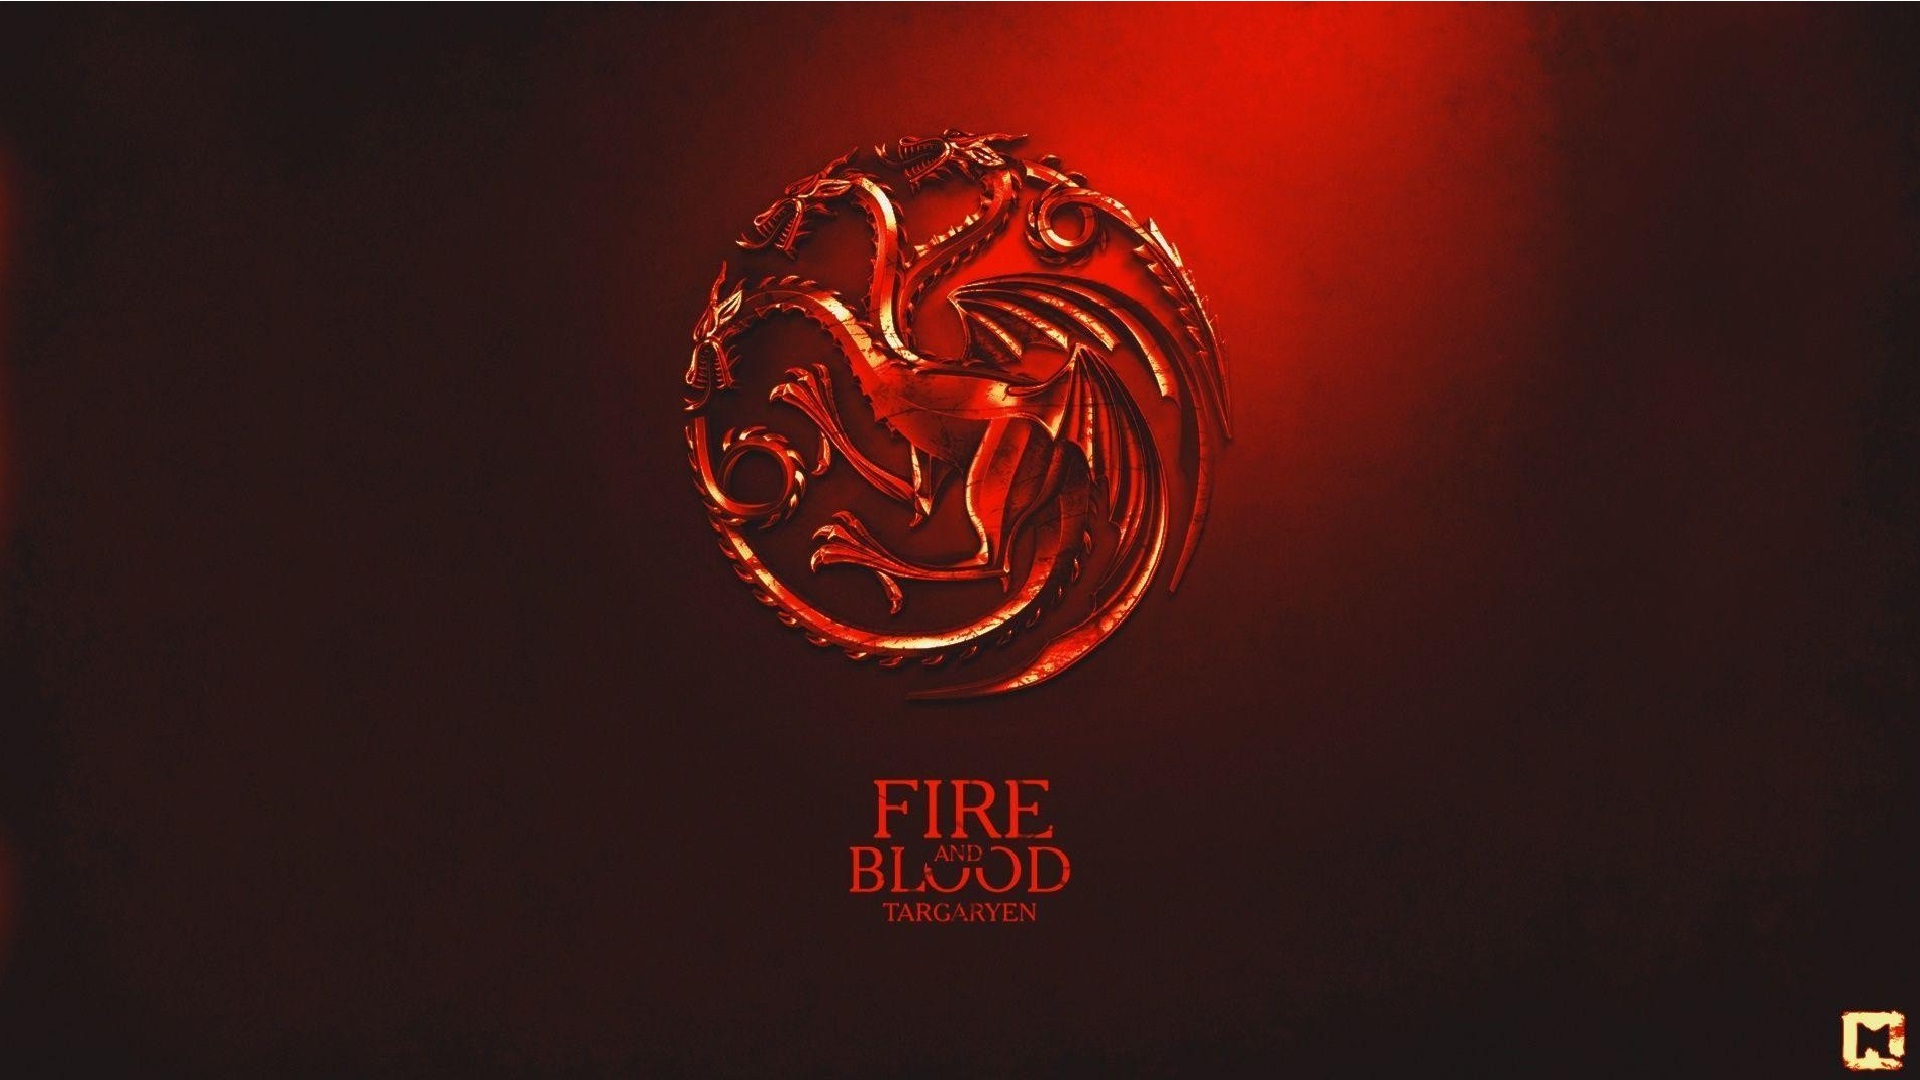 House Targaryen Game of Thrones Full Movie Wallpaper With high-resolution 1920X1080 pixel. You can use this poster wallpaper for your Desktop Computers, Mac Screensavers, Windows Backgrounds, iPhone Wallpapers, Tablet or Android Lock screen and another Mobile device